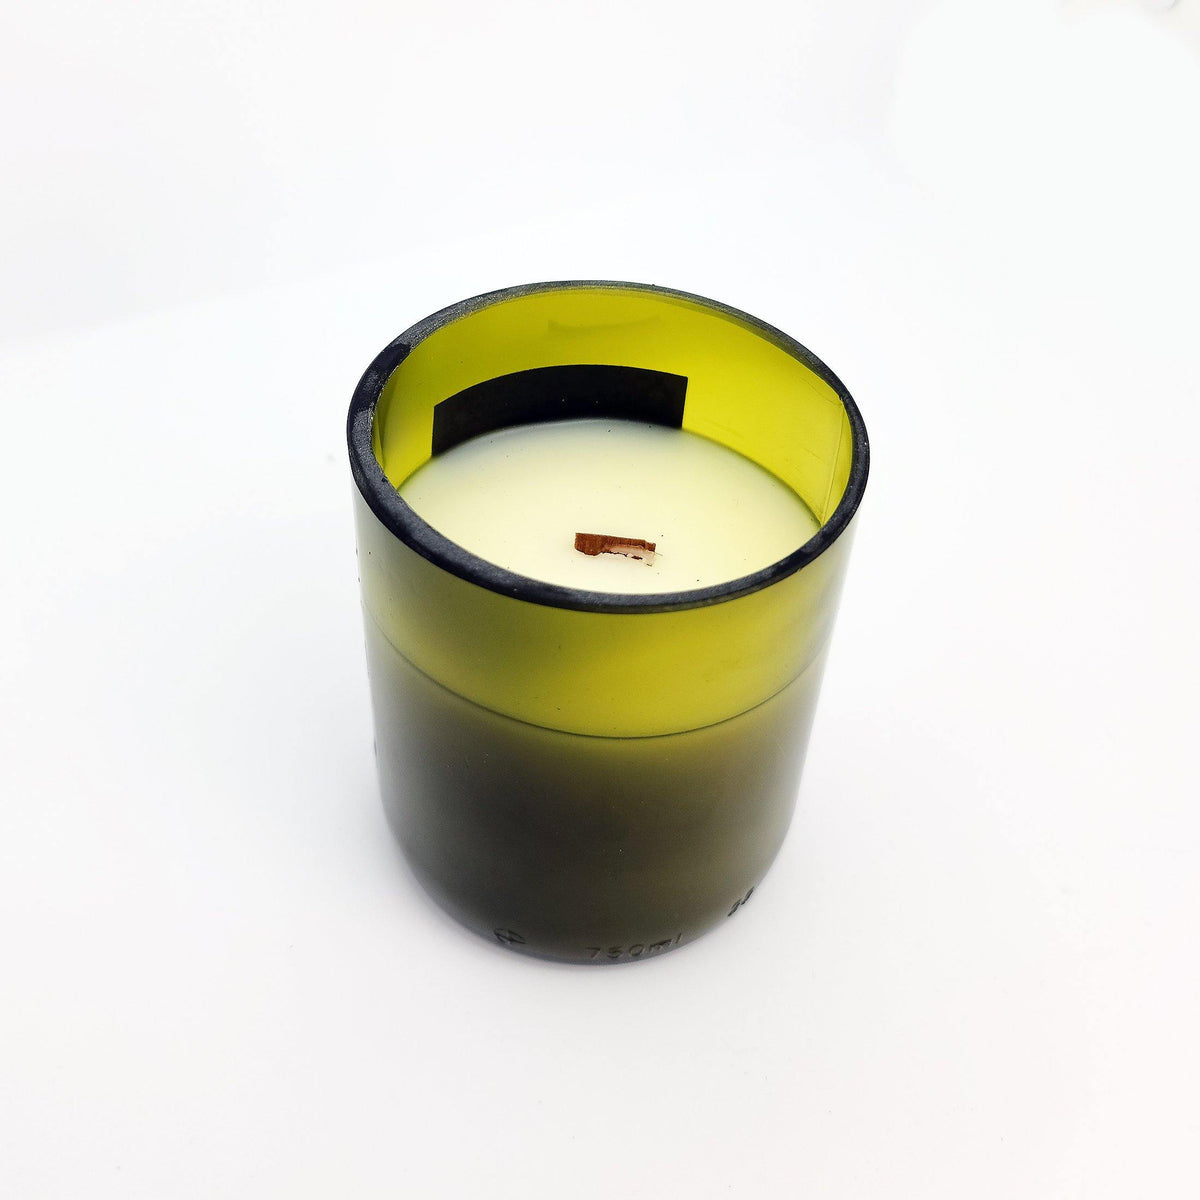 Mandarin & Resin Wooden Wick Scented Candle - LUVOCANDLES - Scented Wooden Wick Handmade in Montreal